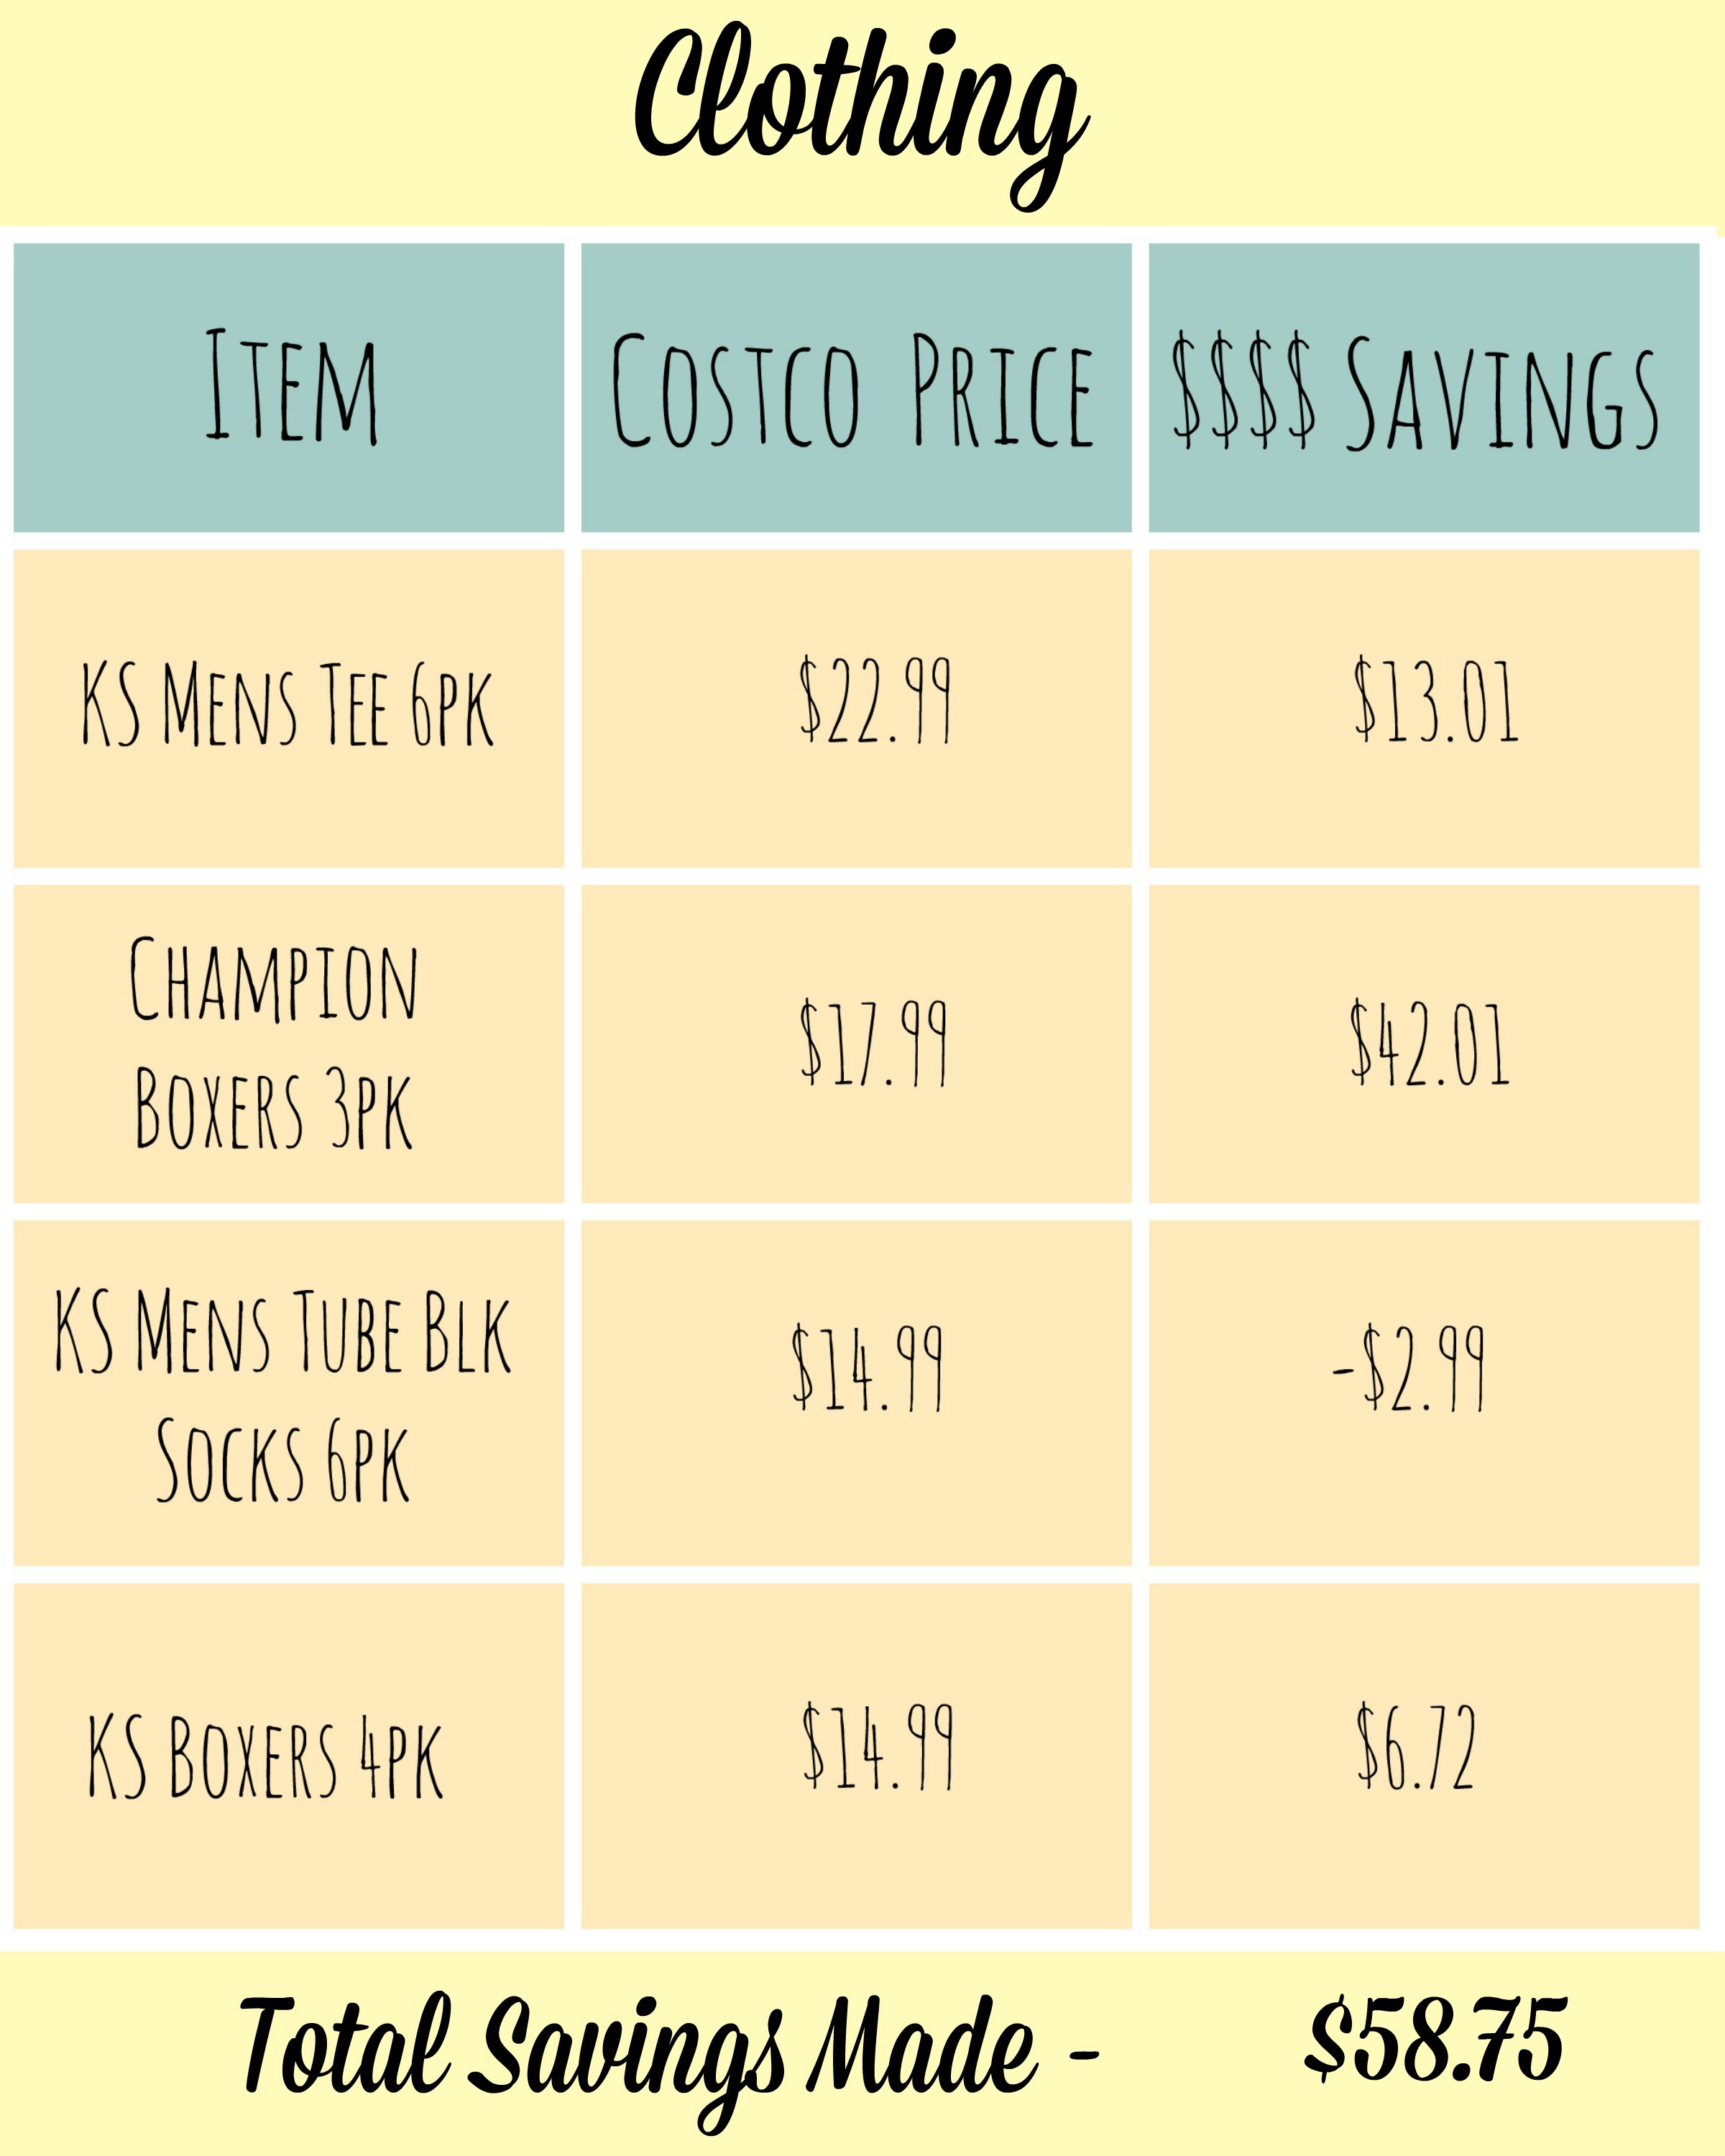 Costco Review & Price Comparison {Ask Sarah does math, yeah!}